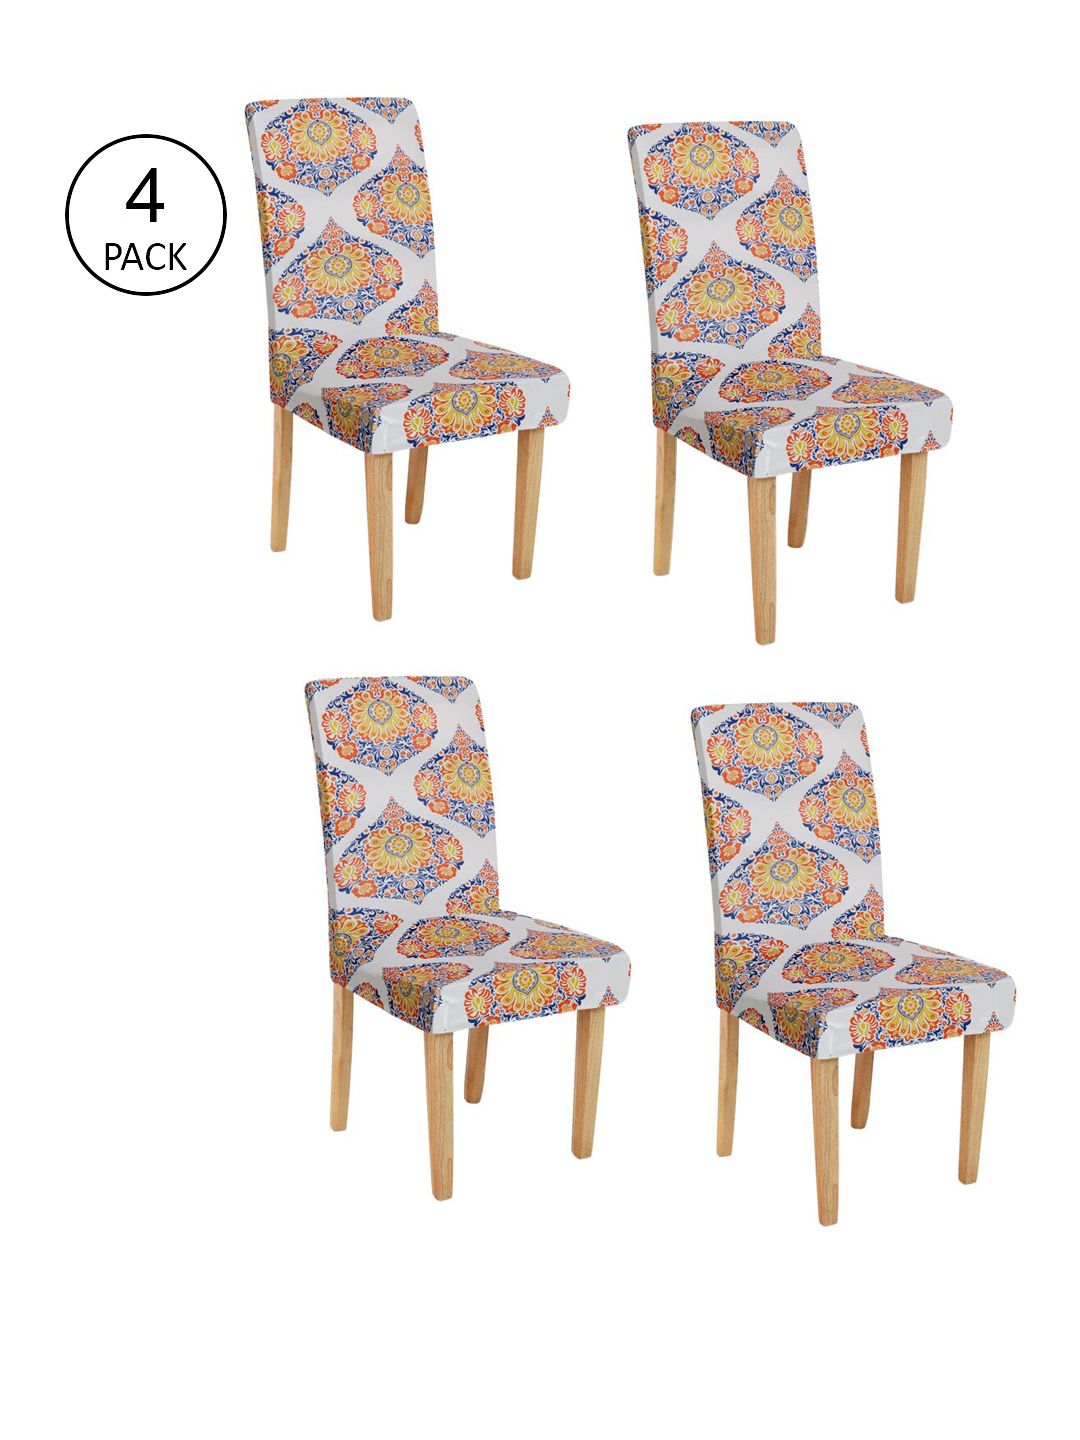 Rajasthan Decor Set Of 4 Cream-Coloured & Orange Ethnic Printed Chair Covers Price in India